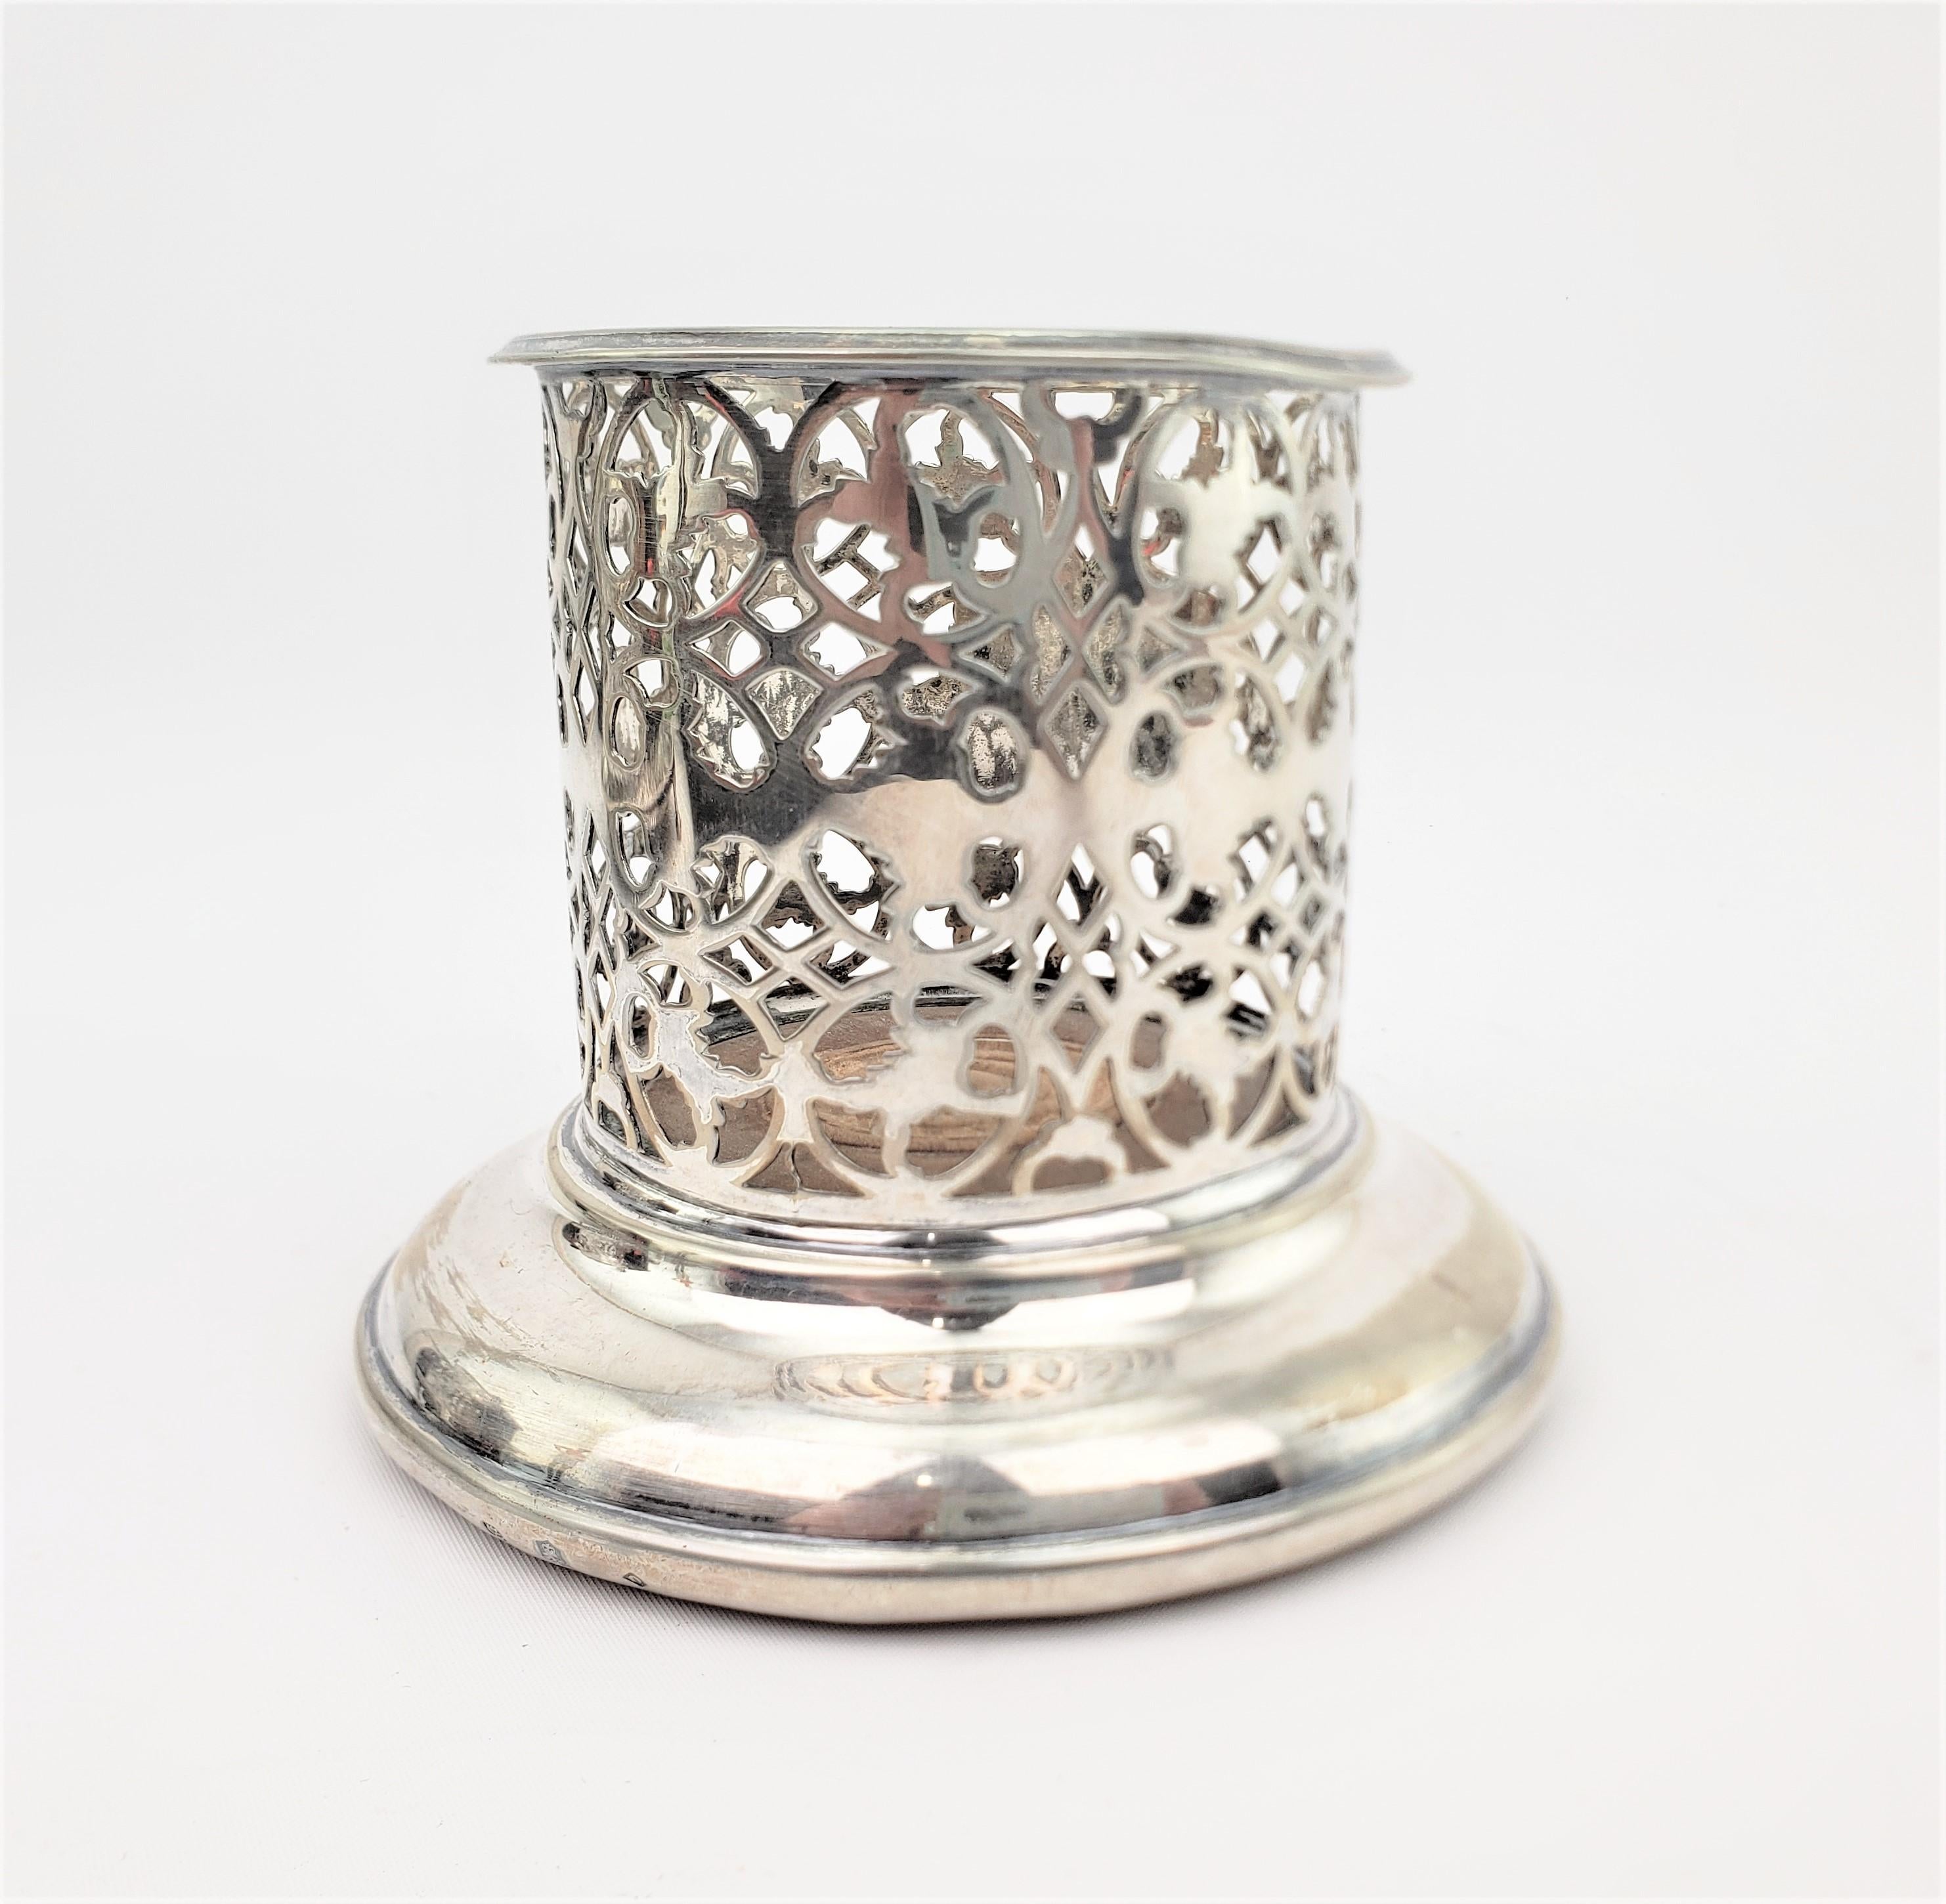 Edwardian Antique Silver Plated Pierced Wine Bottle Coaster with Turned Wooden Base